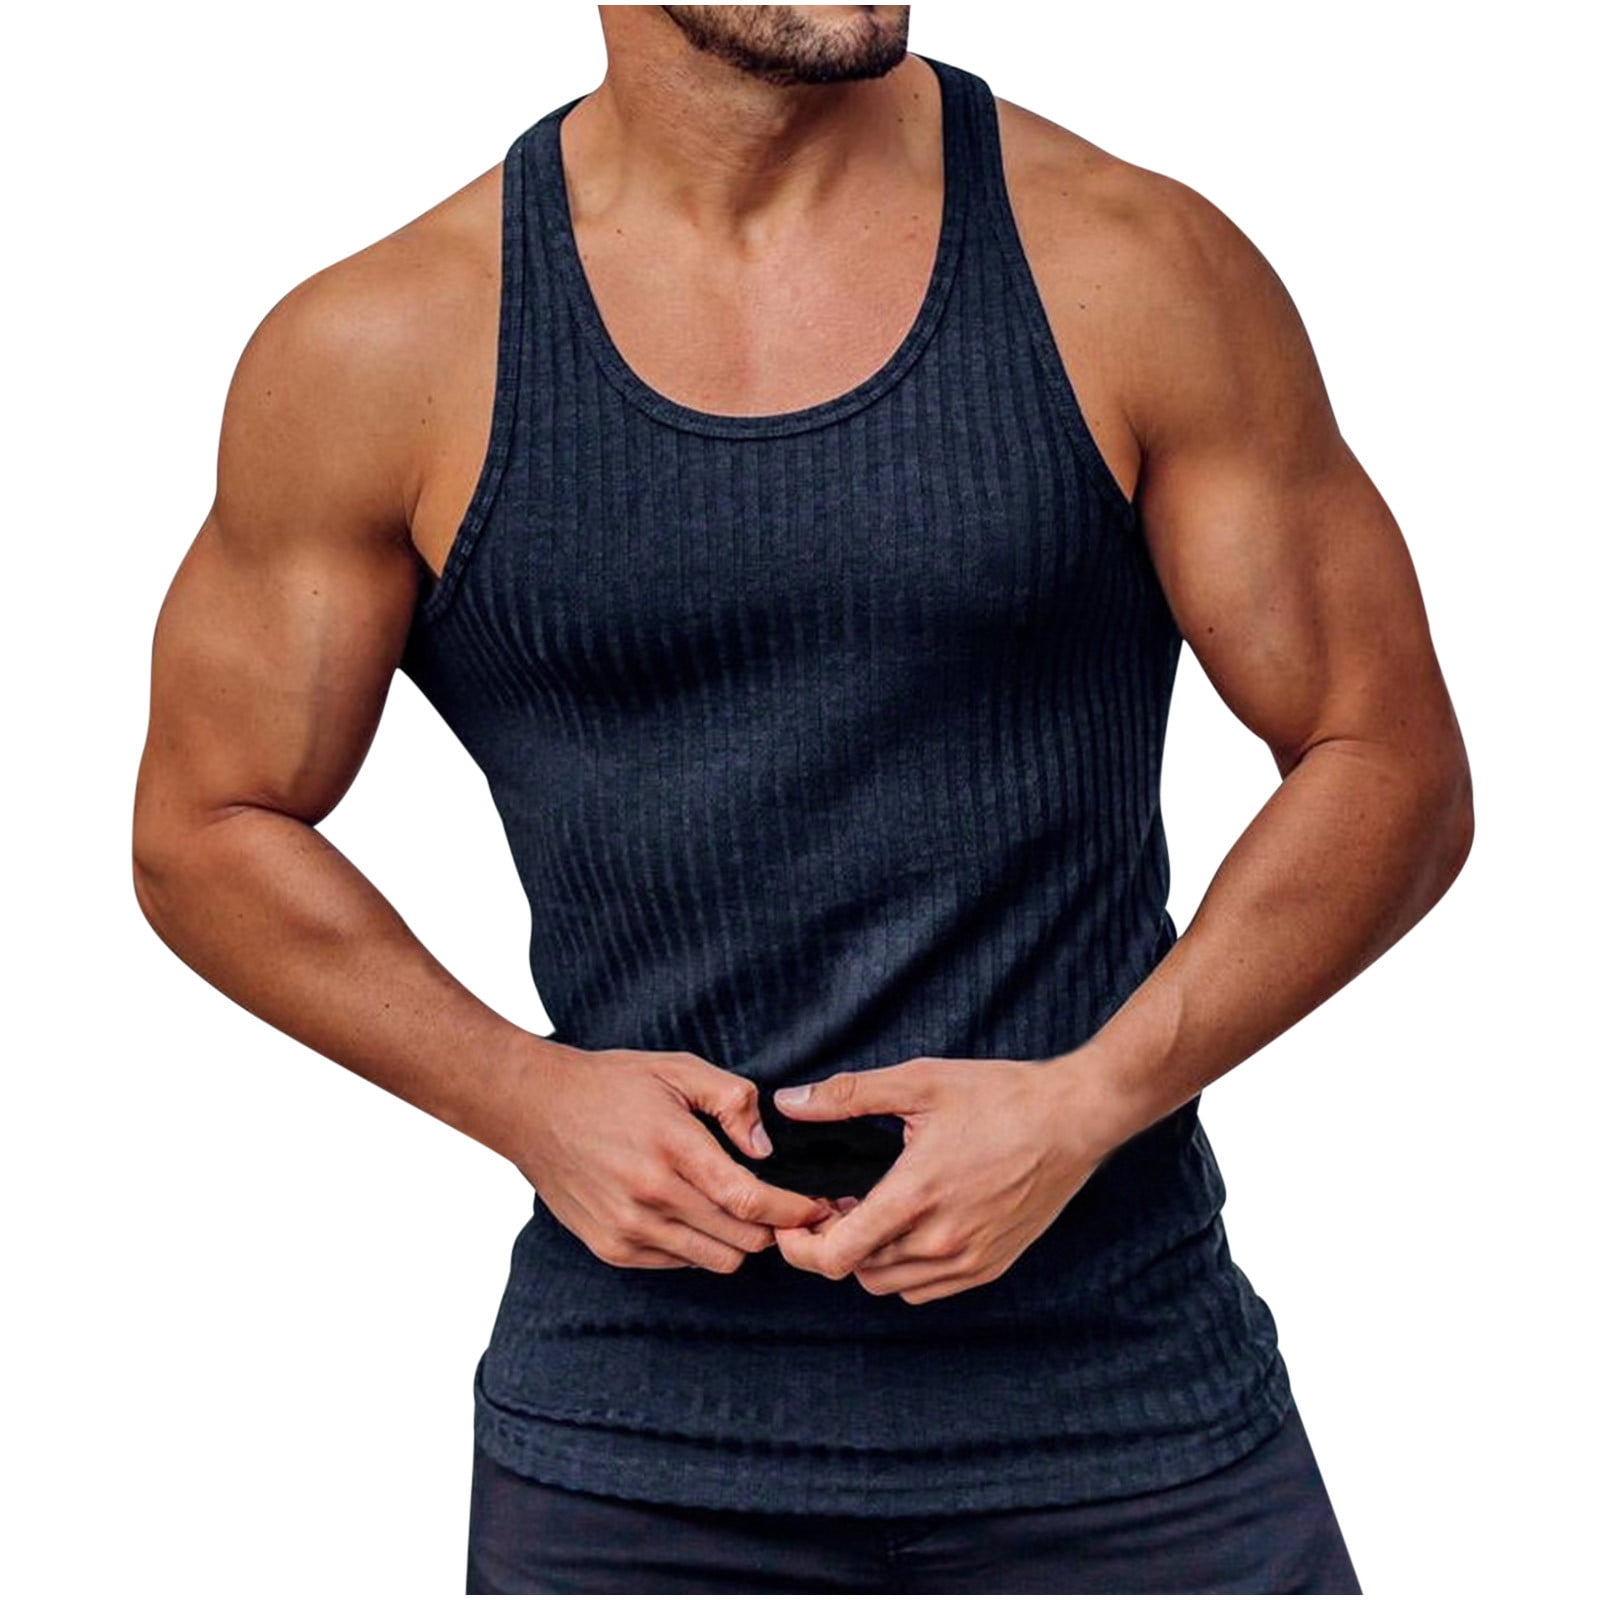 2023 Men's Slim-Fit Tank Top Gym Workout Undershirt Muscle Fit Vest Tee  Fitness Sleeveless T Shirt Bodybuilding 